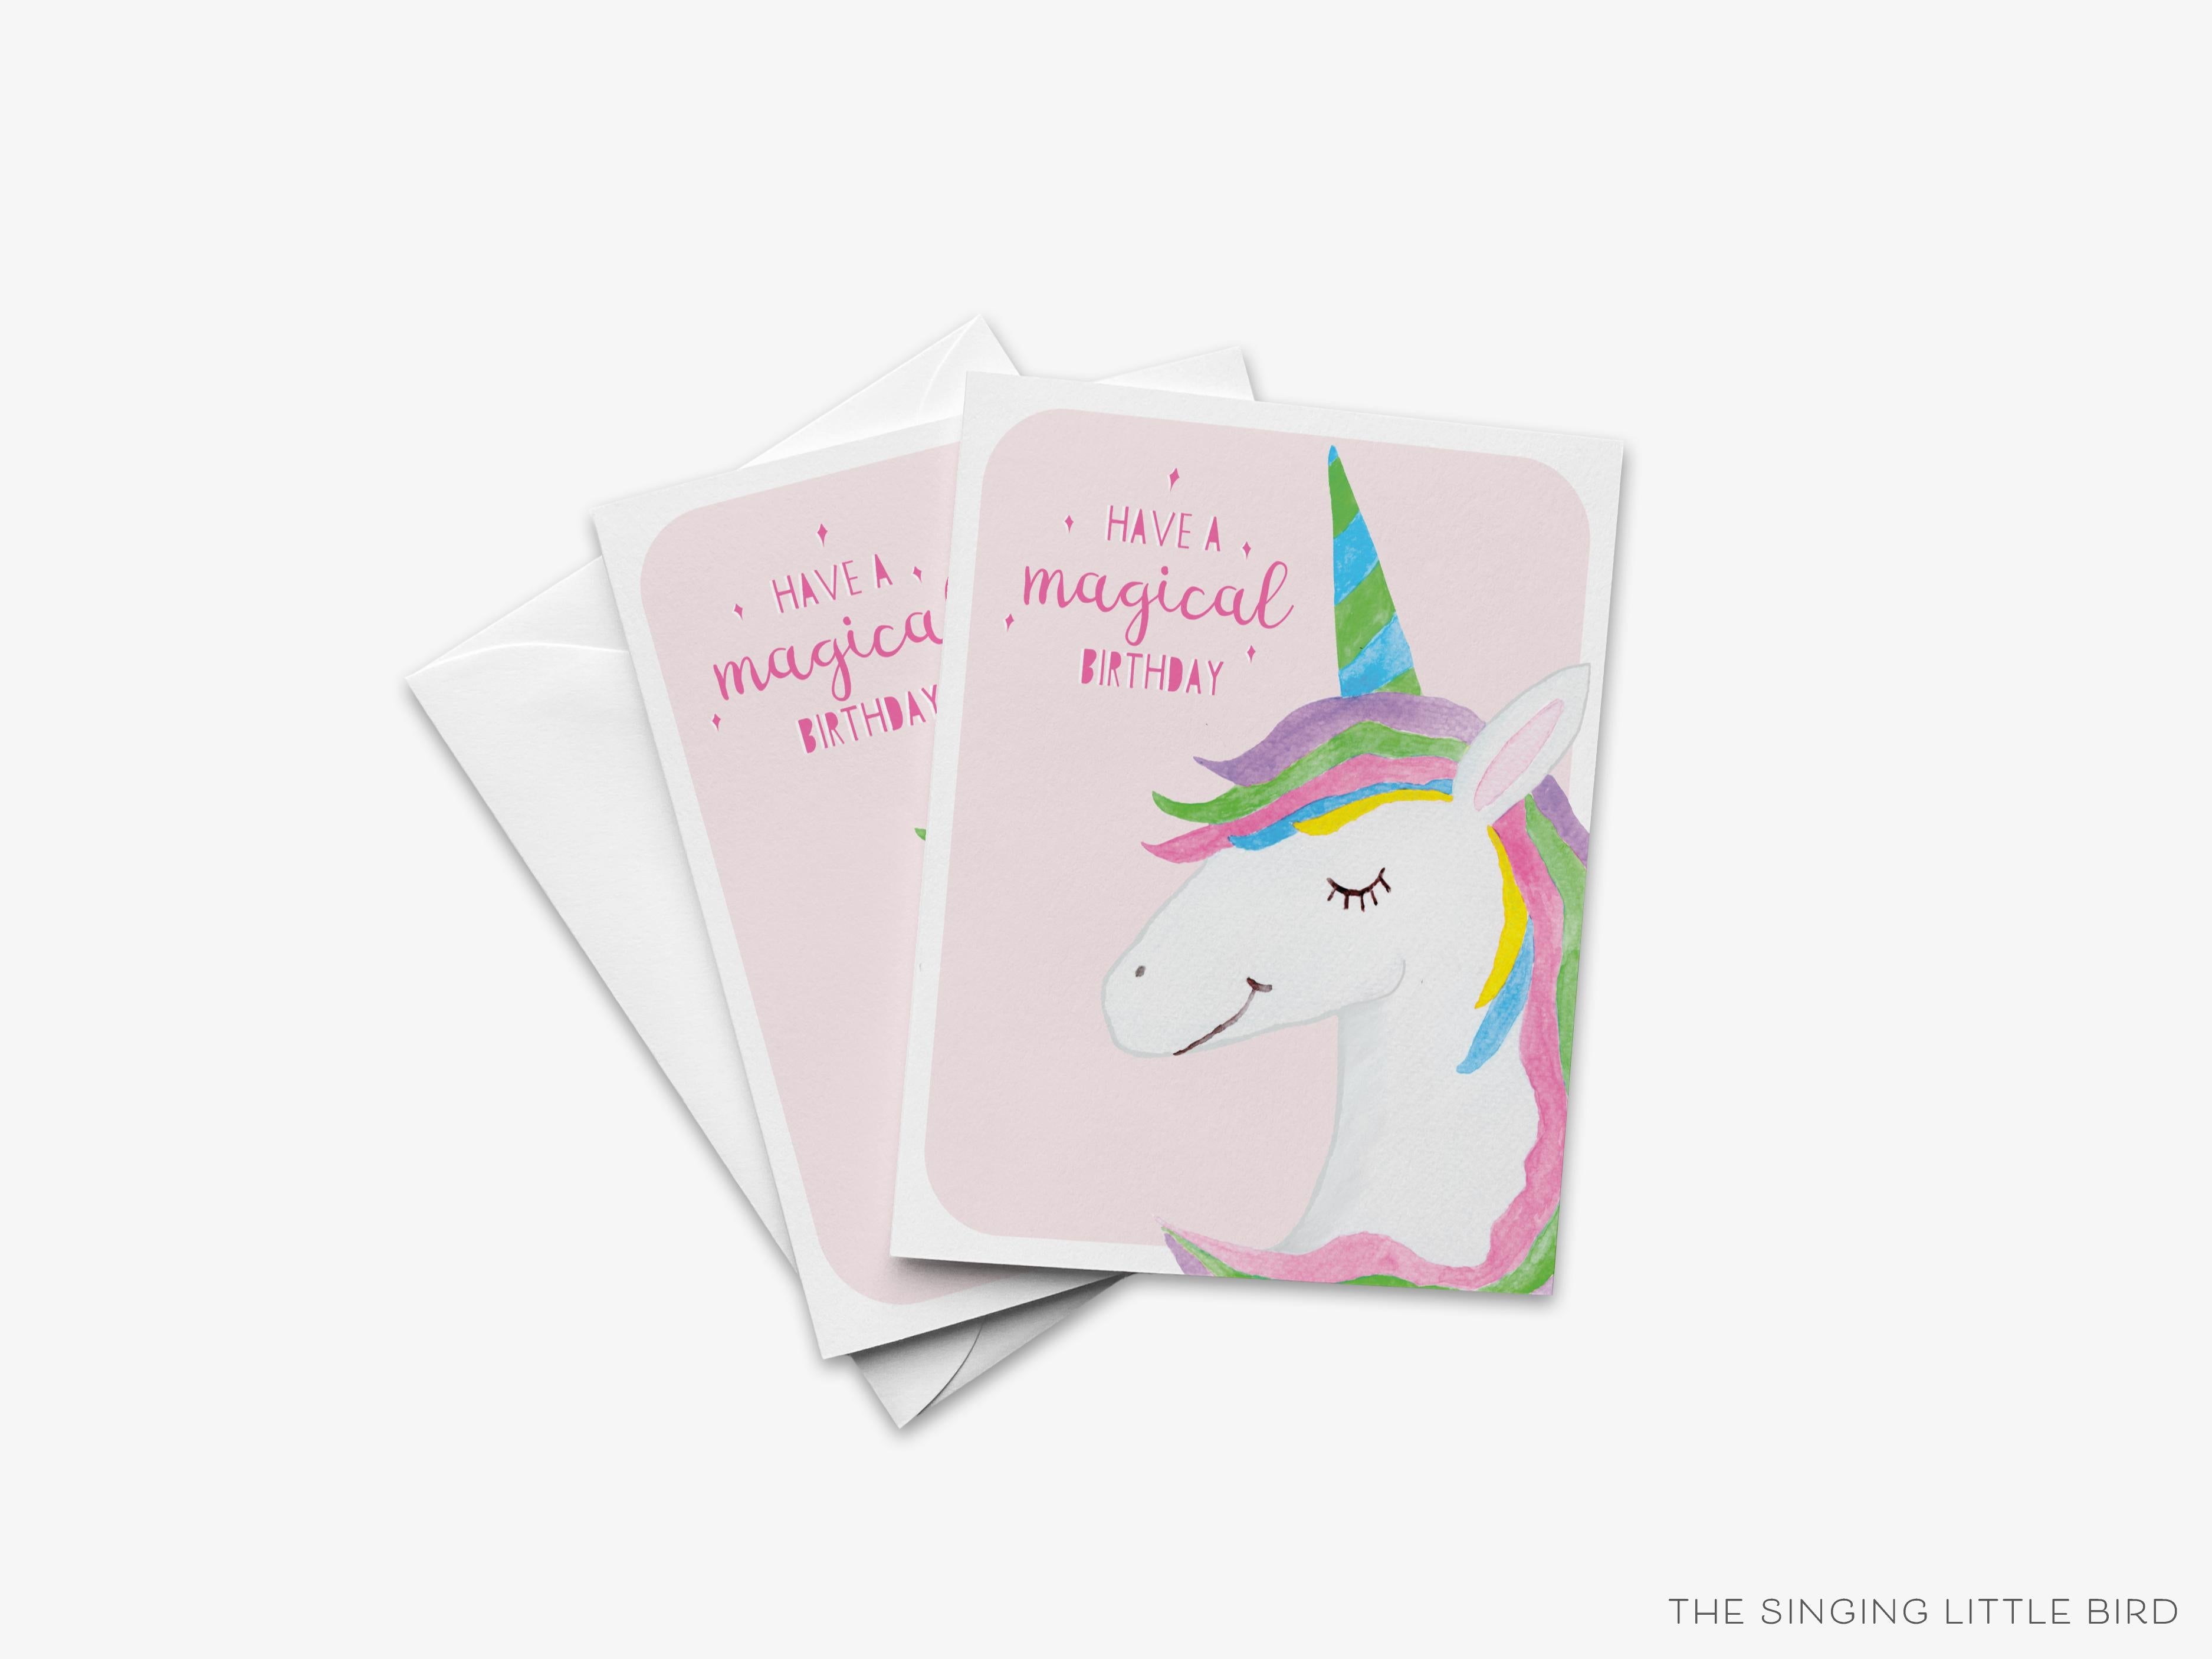 Unicorn Birthday Card-These folded birthday cards are 4.25x5.5 and feature our hand-painted unicorn, printed in the USA on 100lb textured stock. They come with a White envelope and make a great card for a magical birthday.-The Singing Little Bird